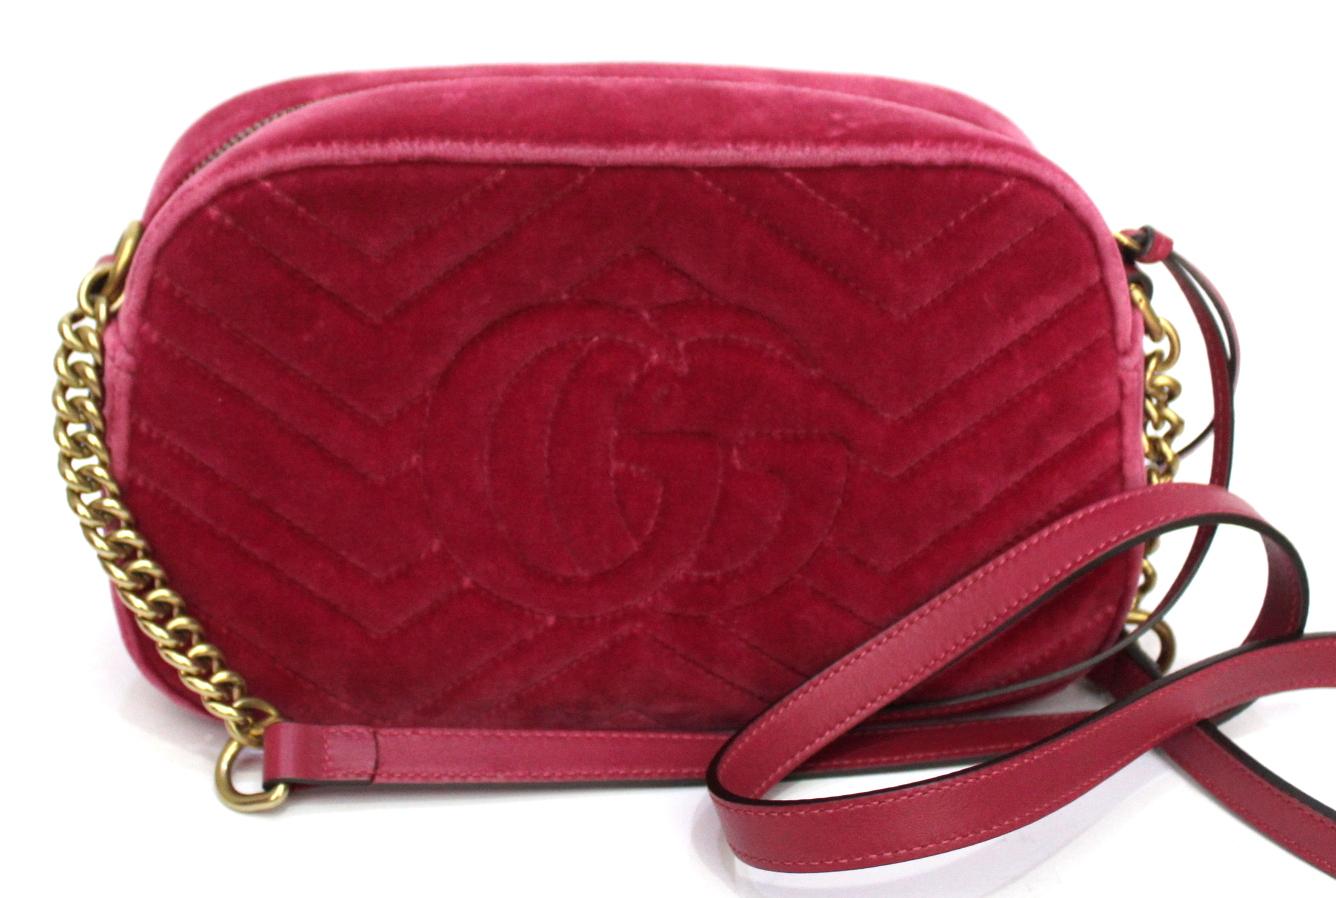 Gucci line Marmont bag in fuchsia velvet with gold hardware.
Top zip closure. Equipped with a leather and chain shoulder strap to wear it comfortably on the shoulder.
Internally large and fitted with a pocket. It seems in perfect conditions.